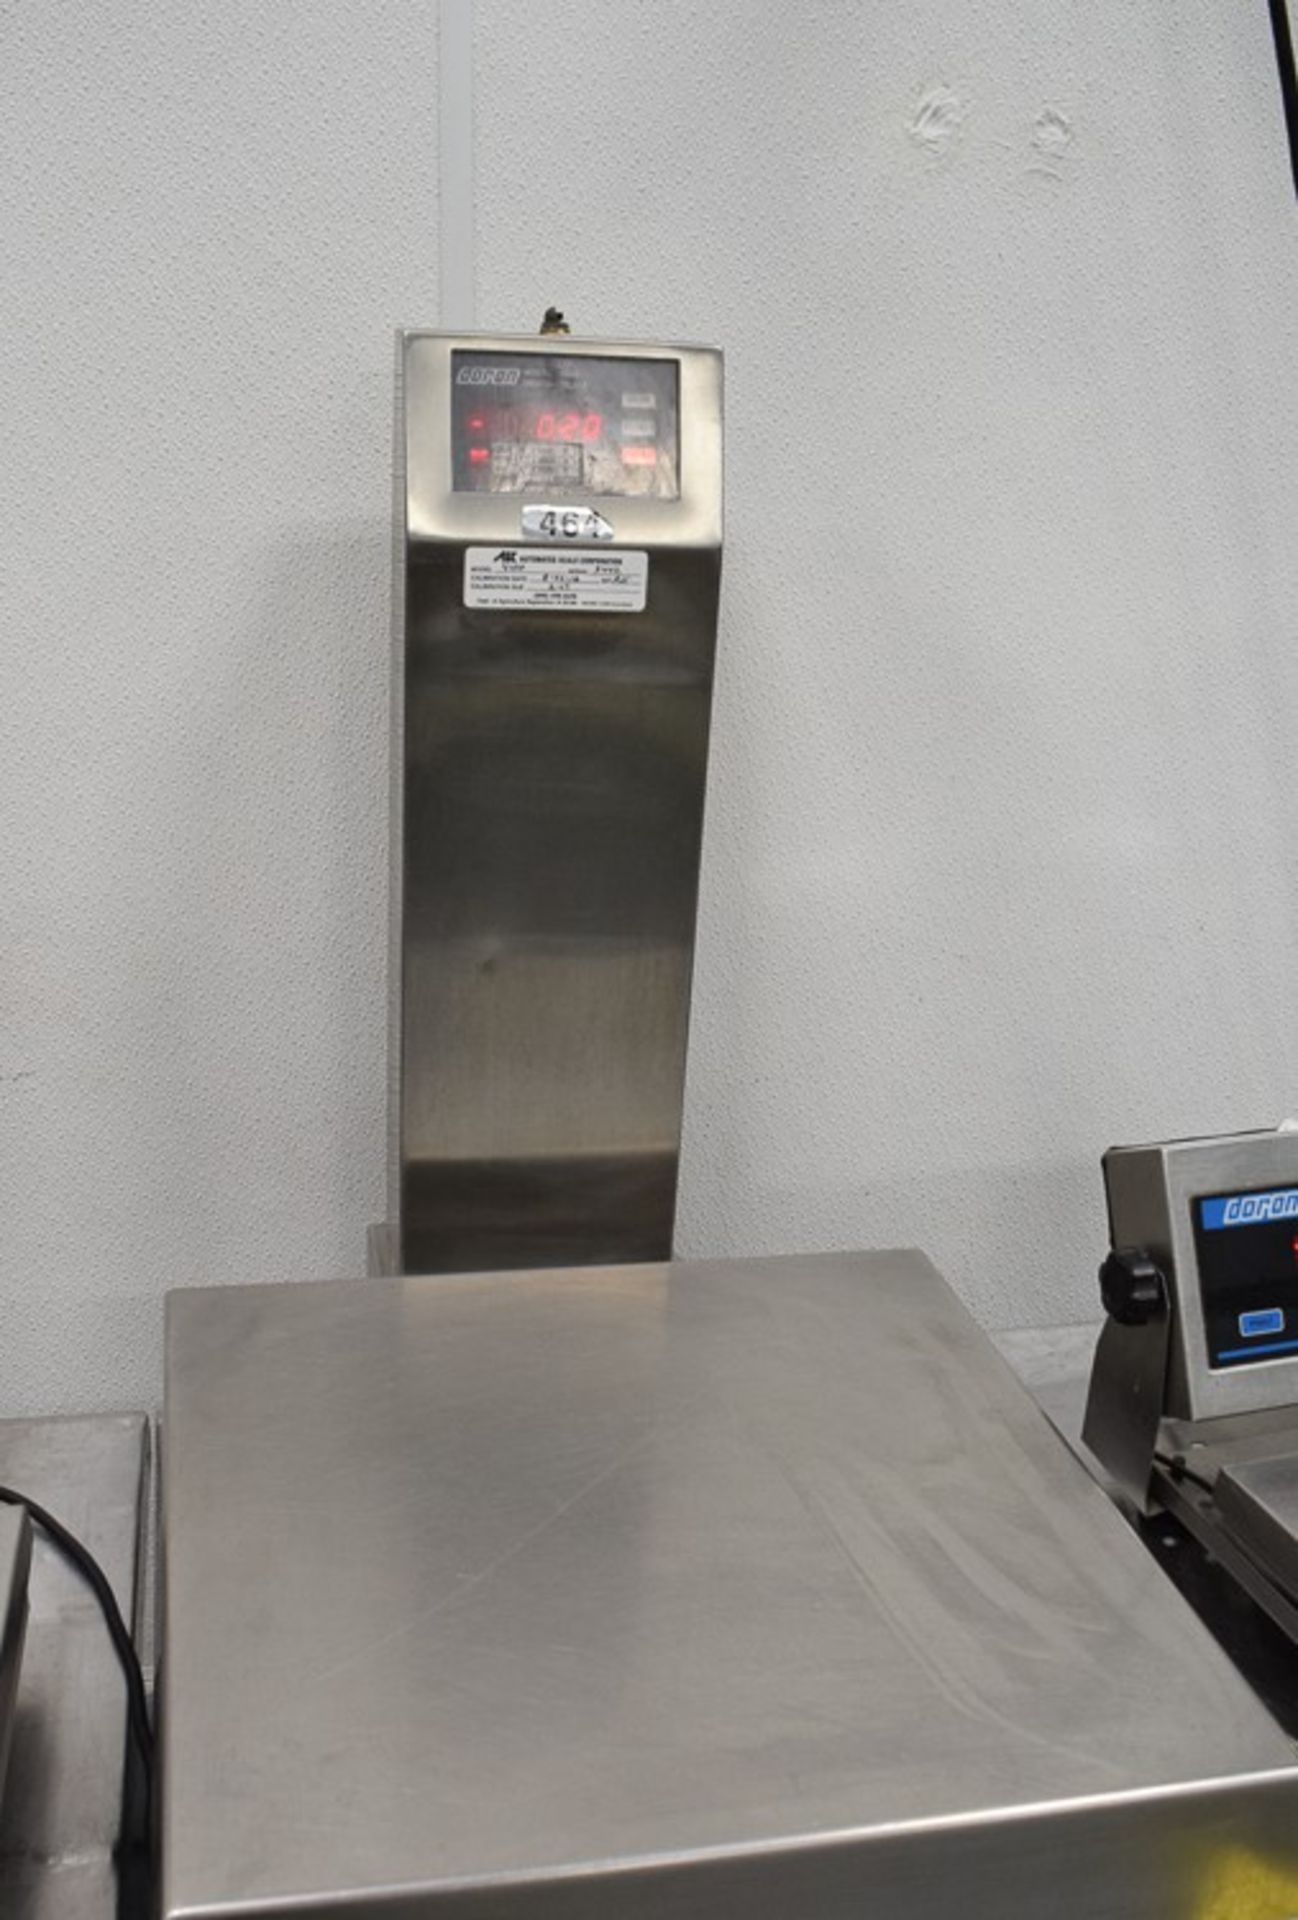 Doran S/S Digital Scale, Model: 4100, SN: 5442, Rigging Fee: Please Contact US Rigging 920-655-2767 - Image 2 of 2